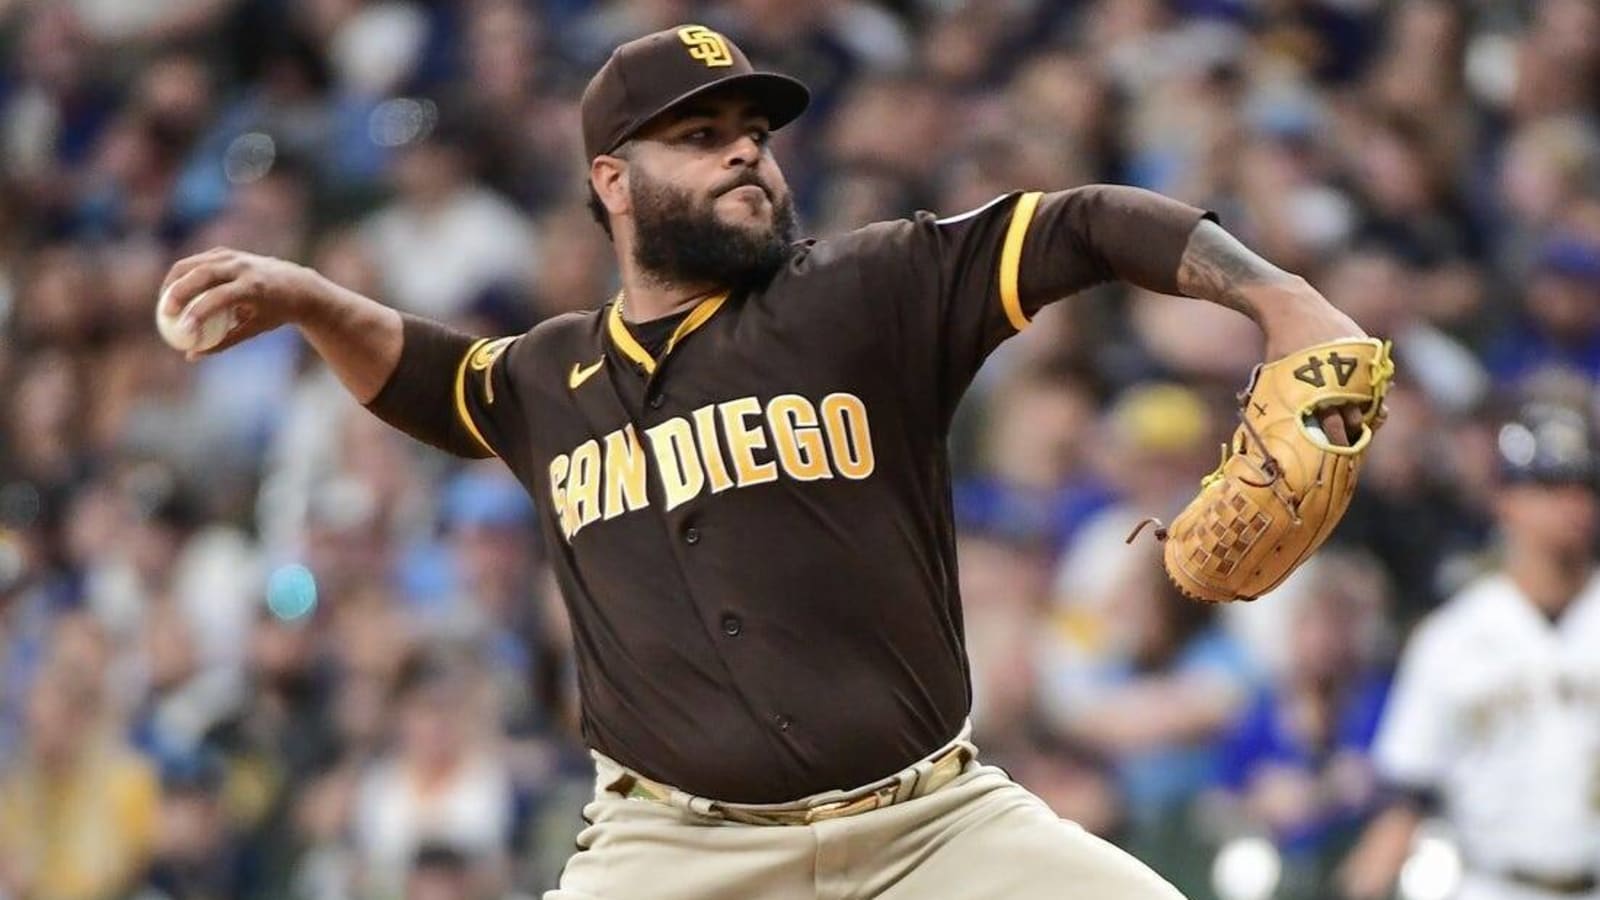 Ailing Padres aim to bounce back against Phillies